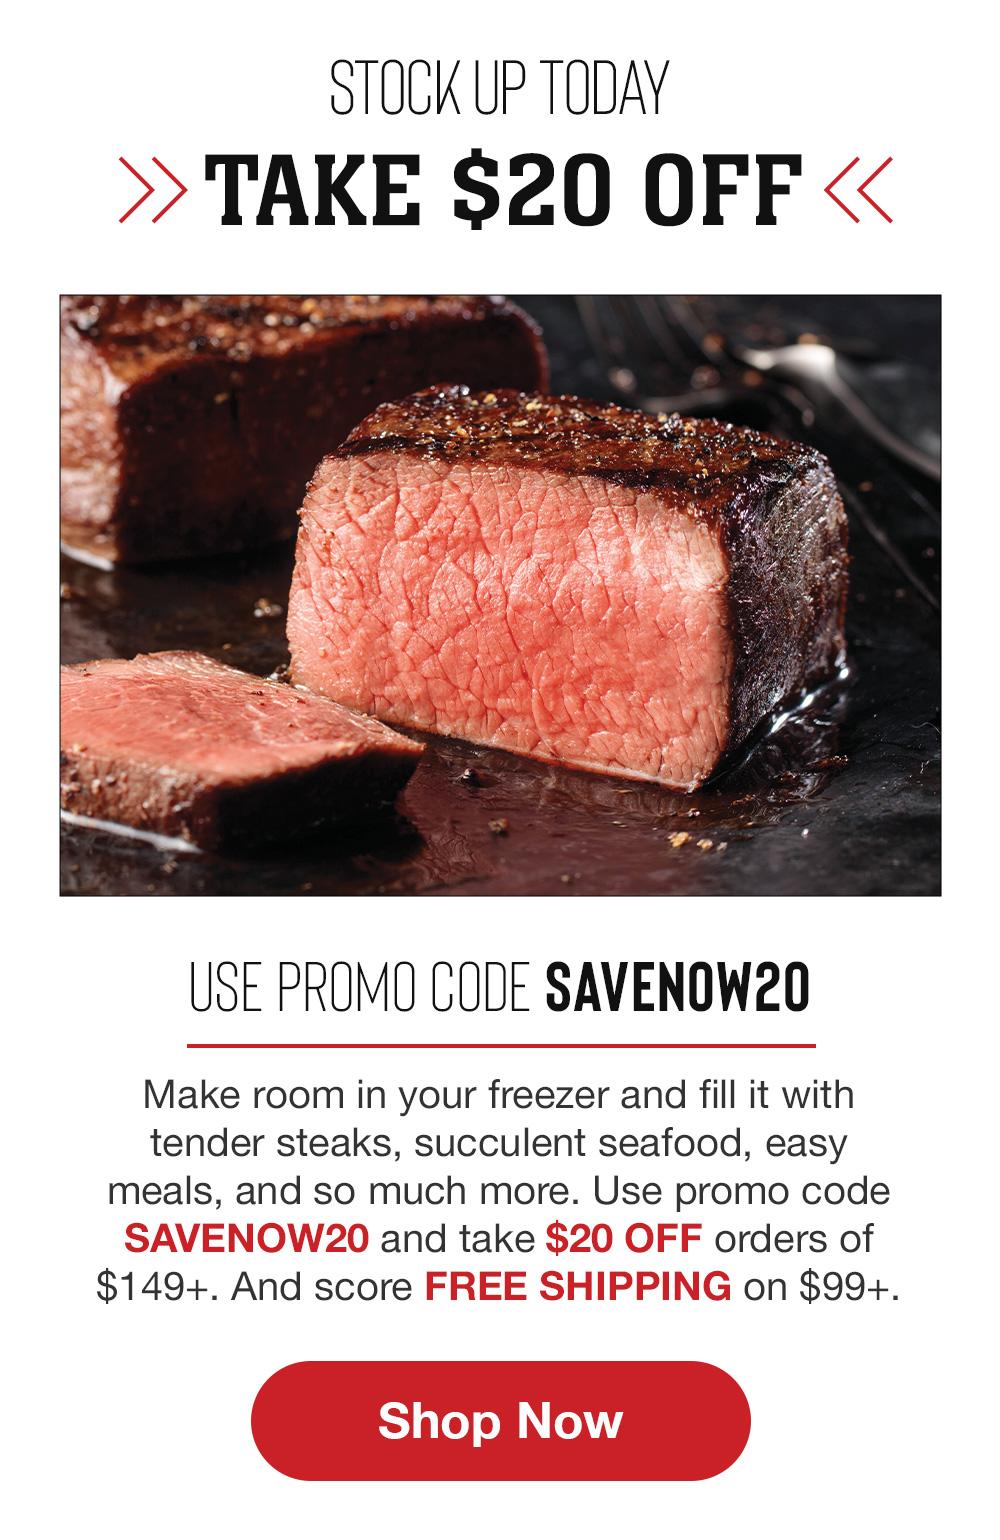 STOCK UP TODAY | » TAKE $20 OFF « | USE PROMO CODE SAVENOW20 | Make room in your freezer and fill it with tender steaks, succulent seafood, easy meals, and so much more. Use promo code SAVENOW20 and take $20 OFF orders $149+. And score FREE SHIPPING on $99+. || Shop Now